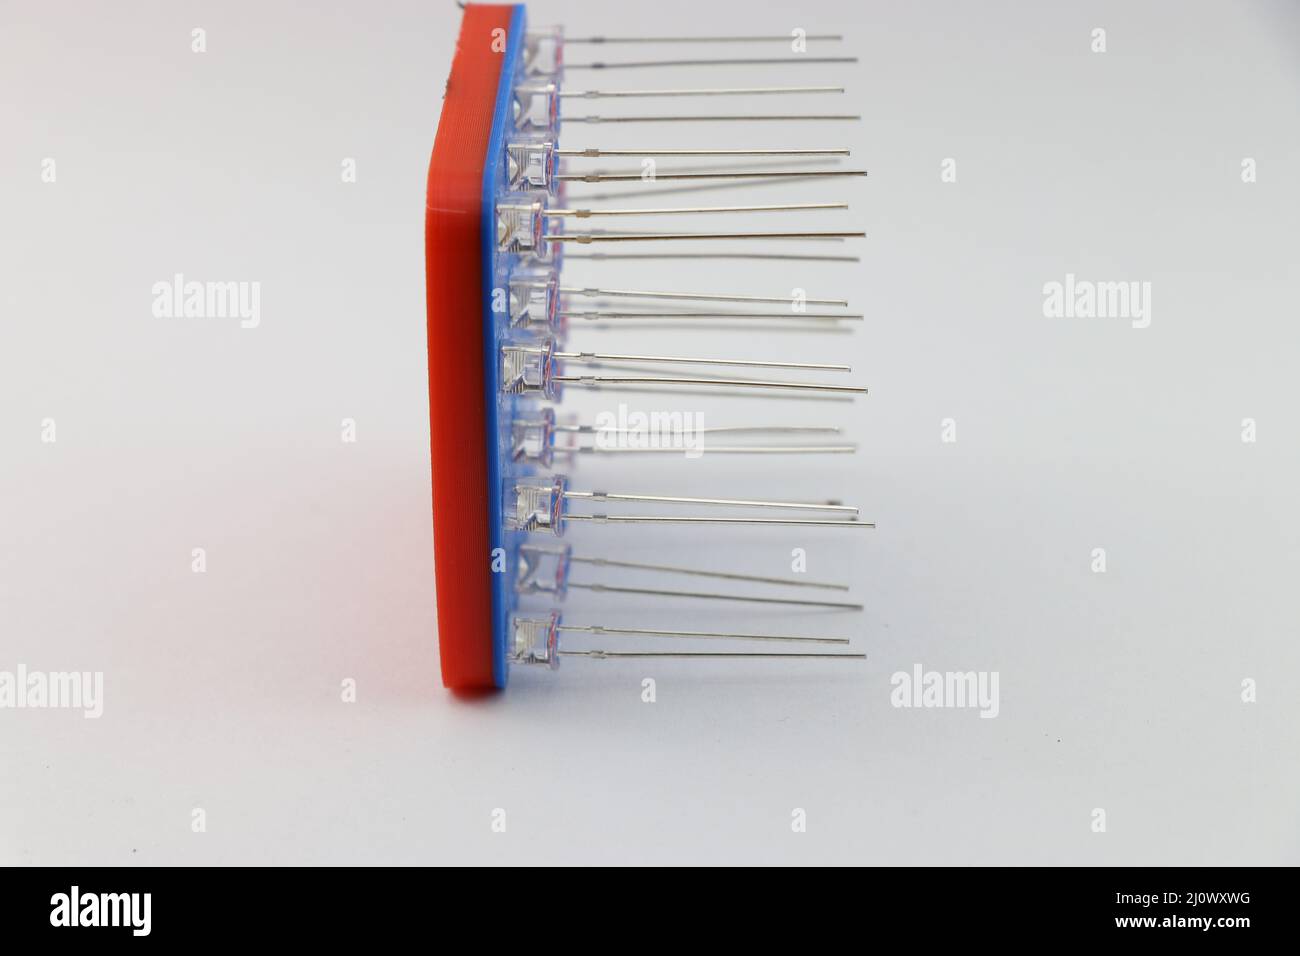 Side view of 3D printed LED jig with light-emitting diodes attached to the slots with the view of led pins arranged in order on white background Stock Photo